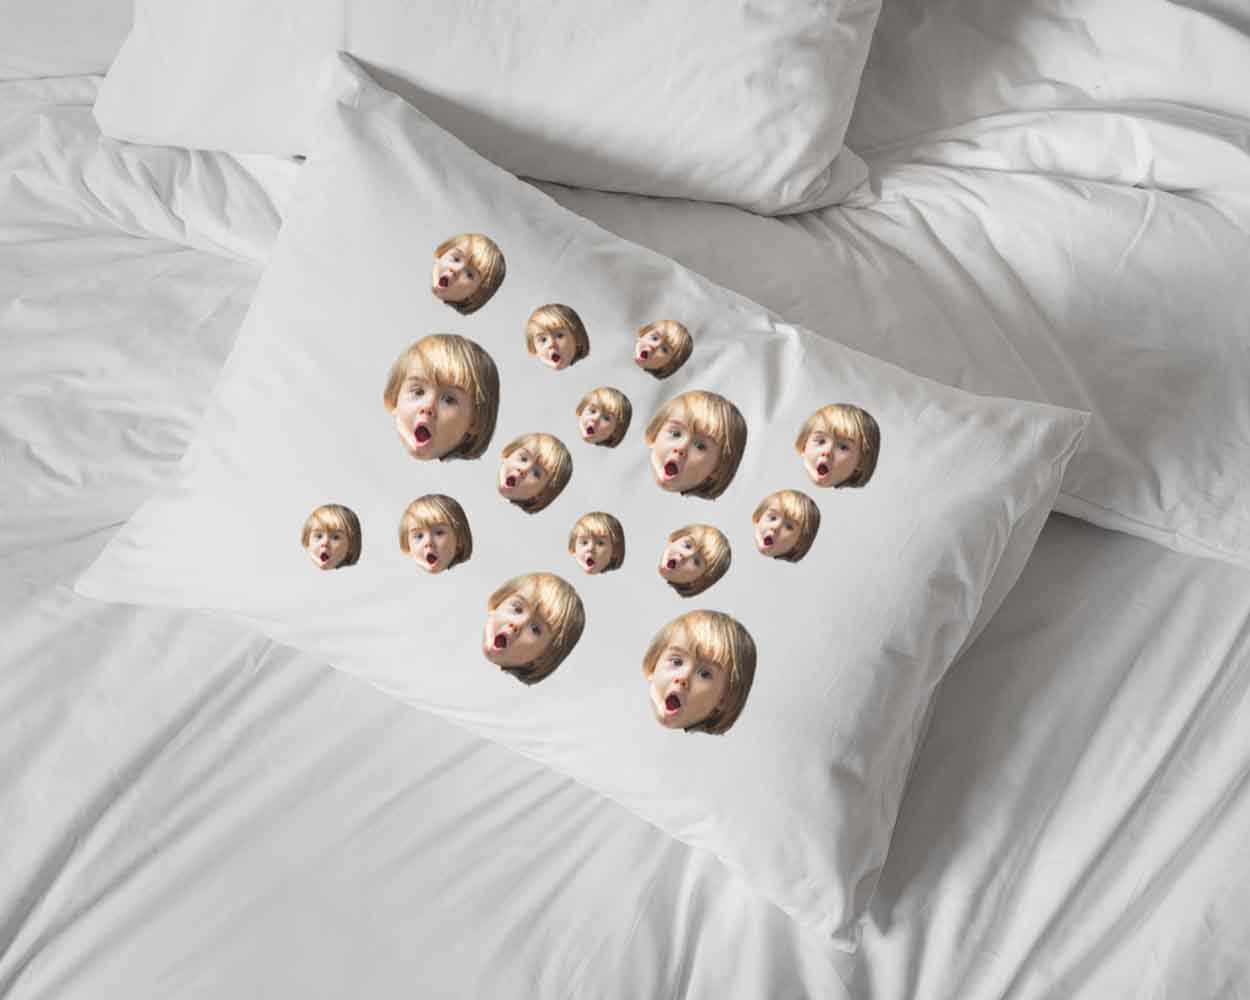 Custom printed and personalized using your photo face cropped and all over design digitally printed on standard white cotton pillowcase makes a fun gift for your special someone.